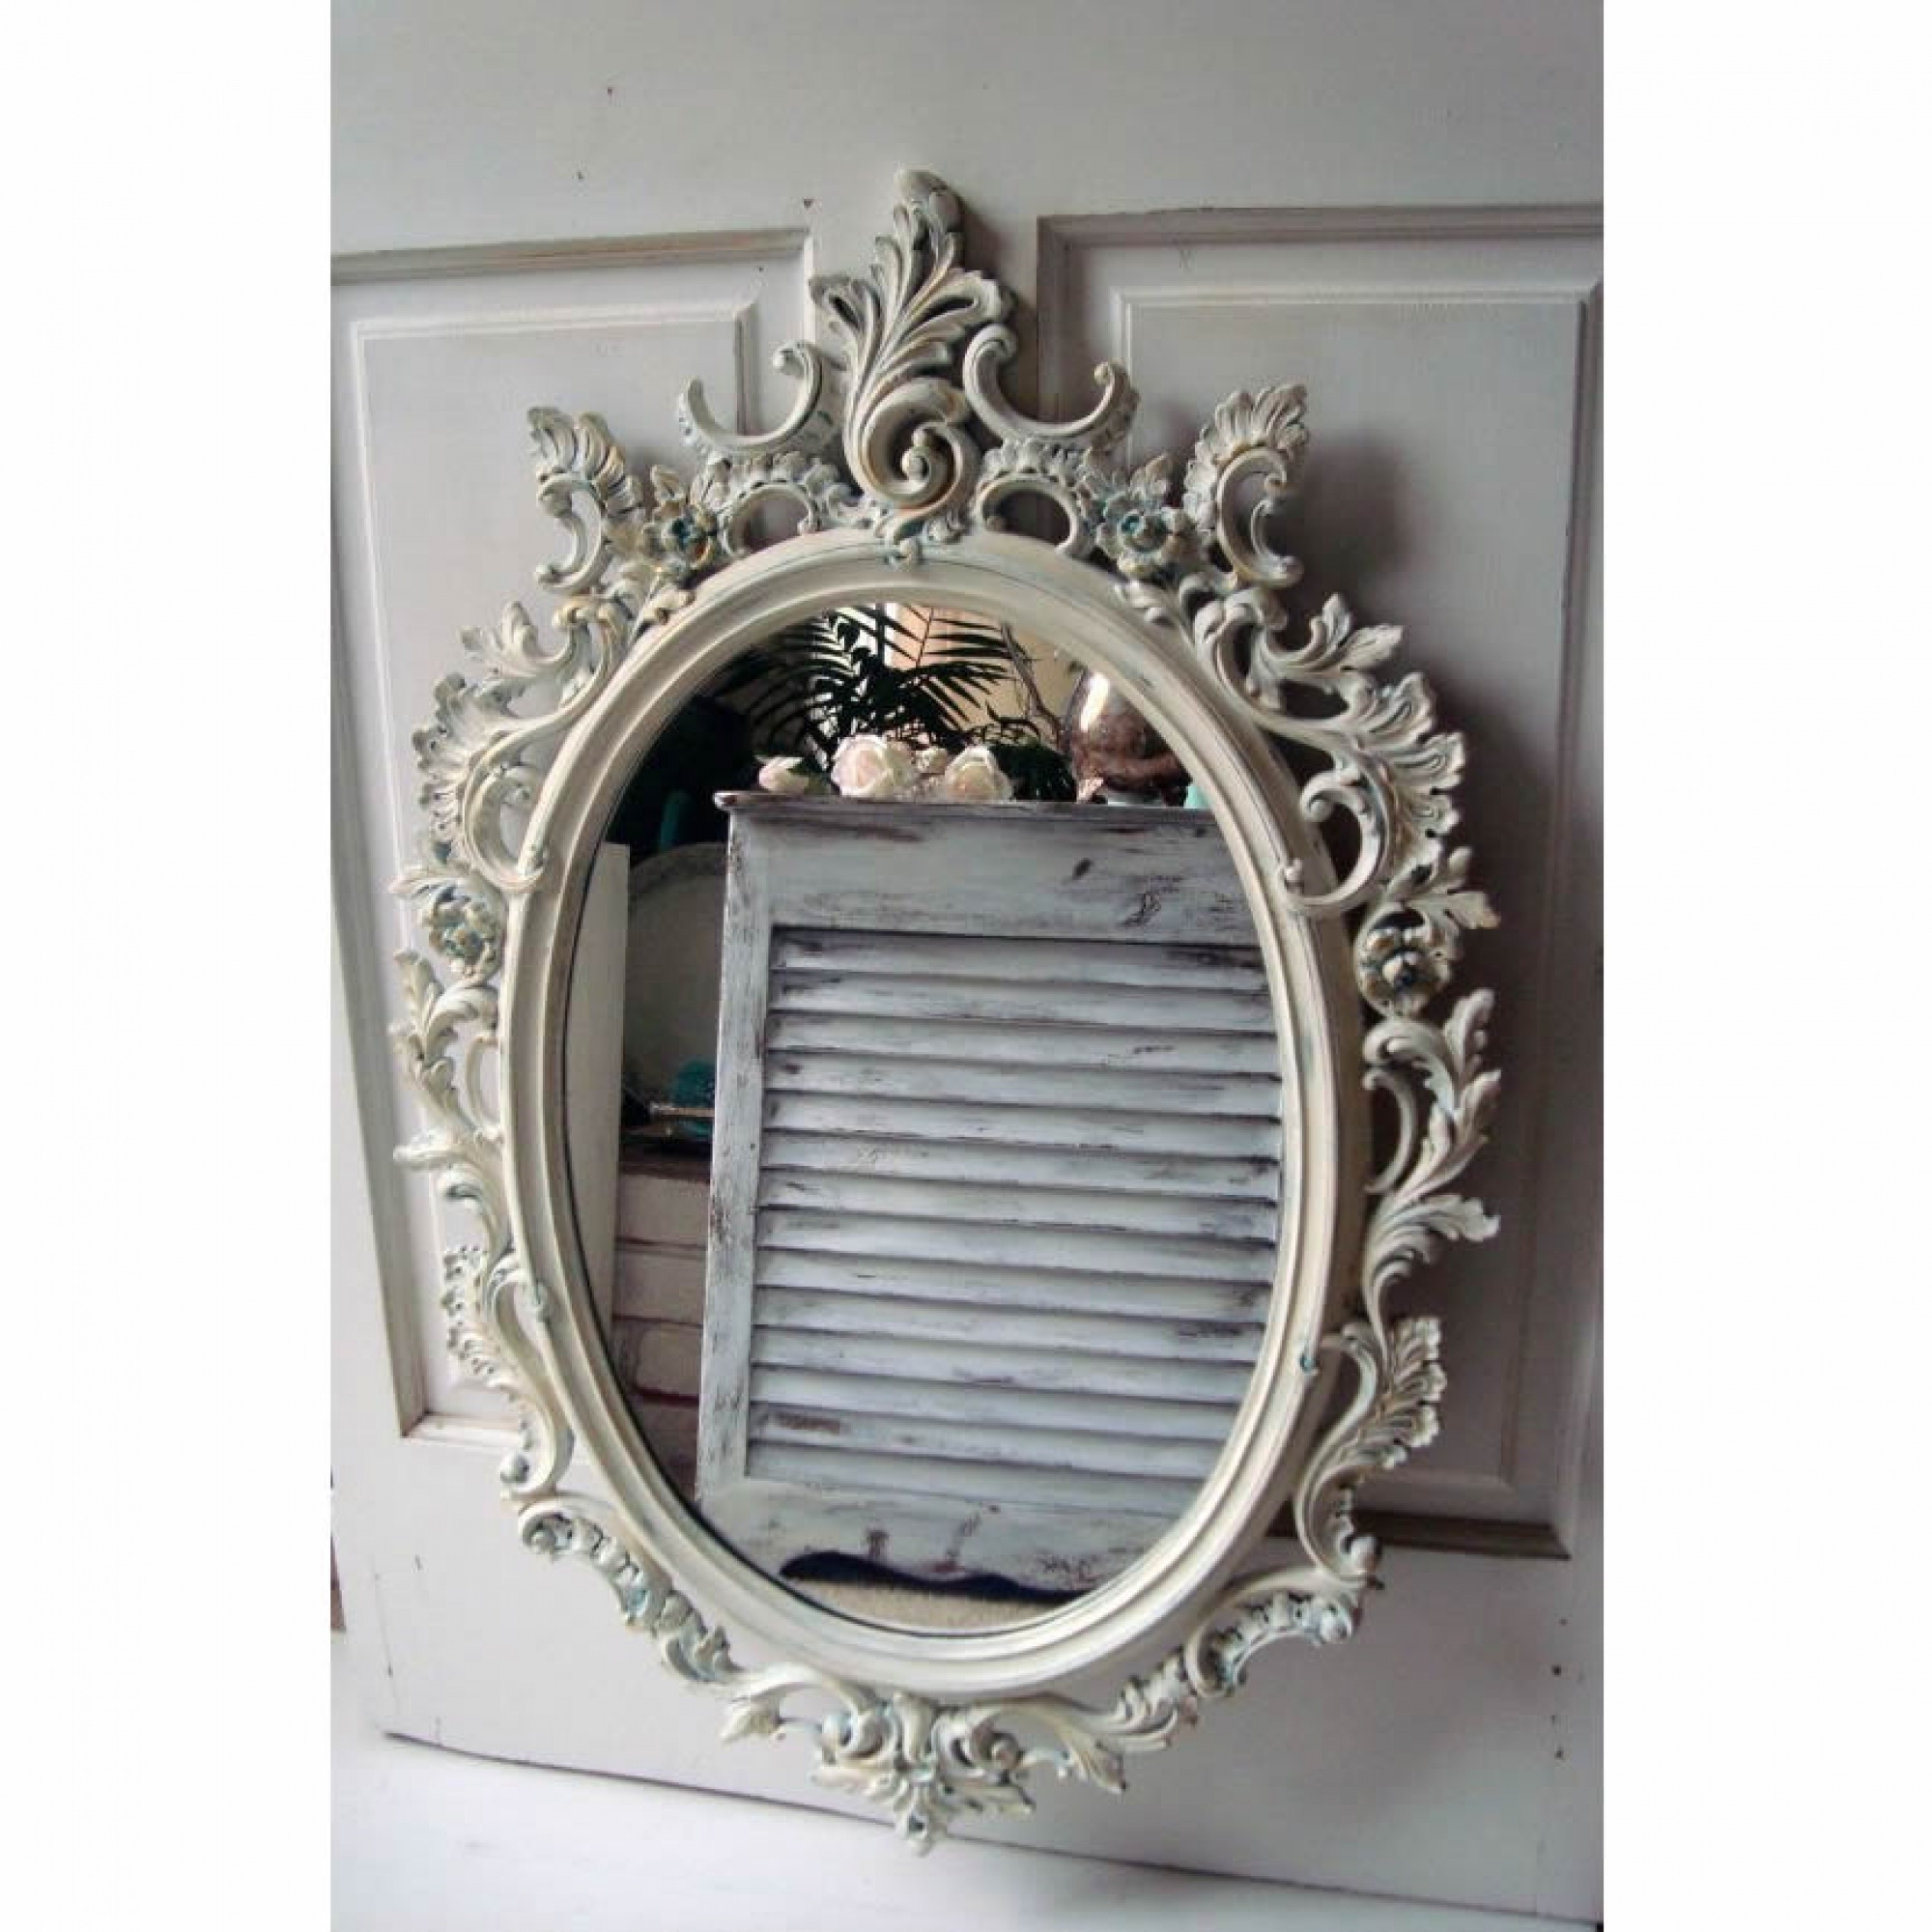 VICTORIAN Gothic Style Plastic Hanging Wall Mirror New White Oval SHABBY CHIC 